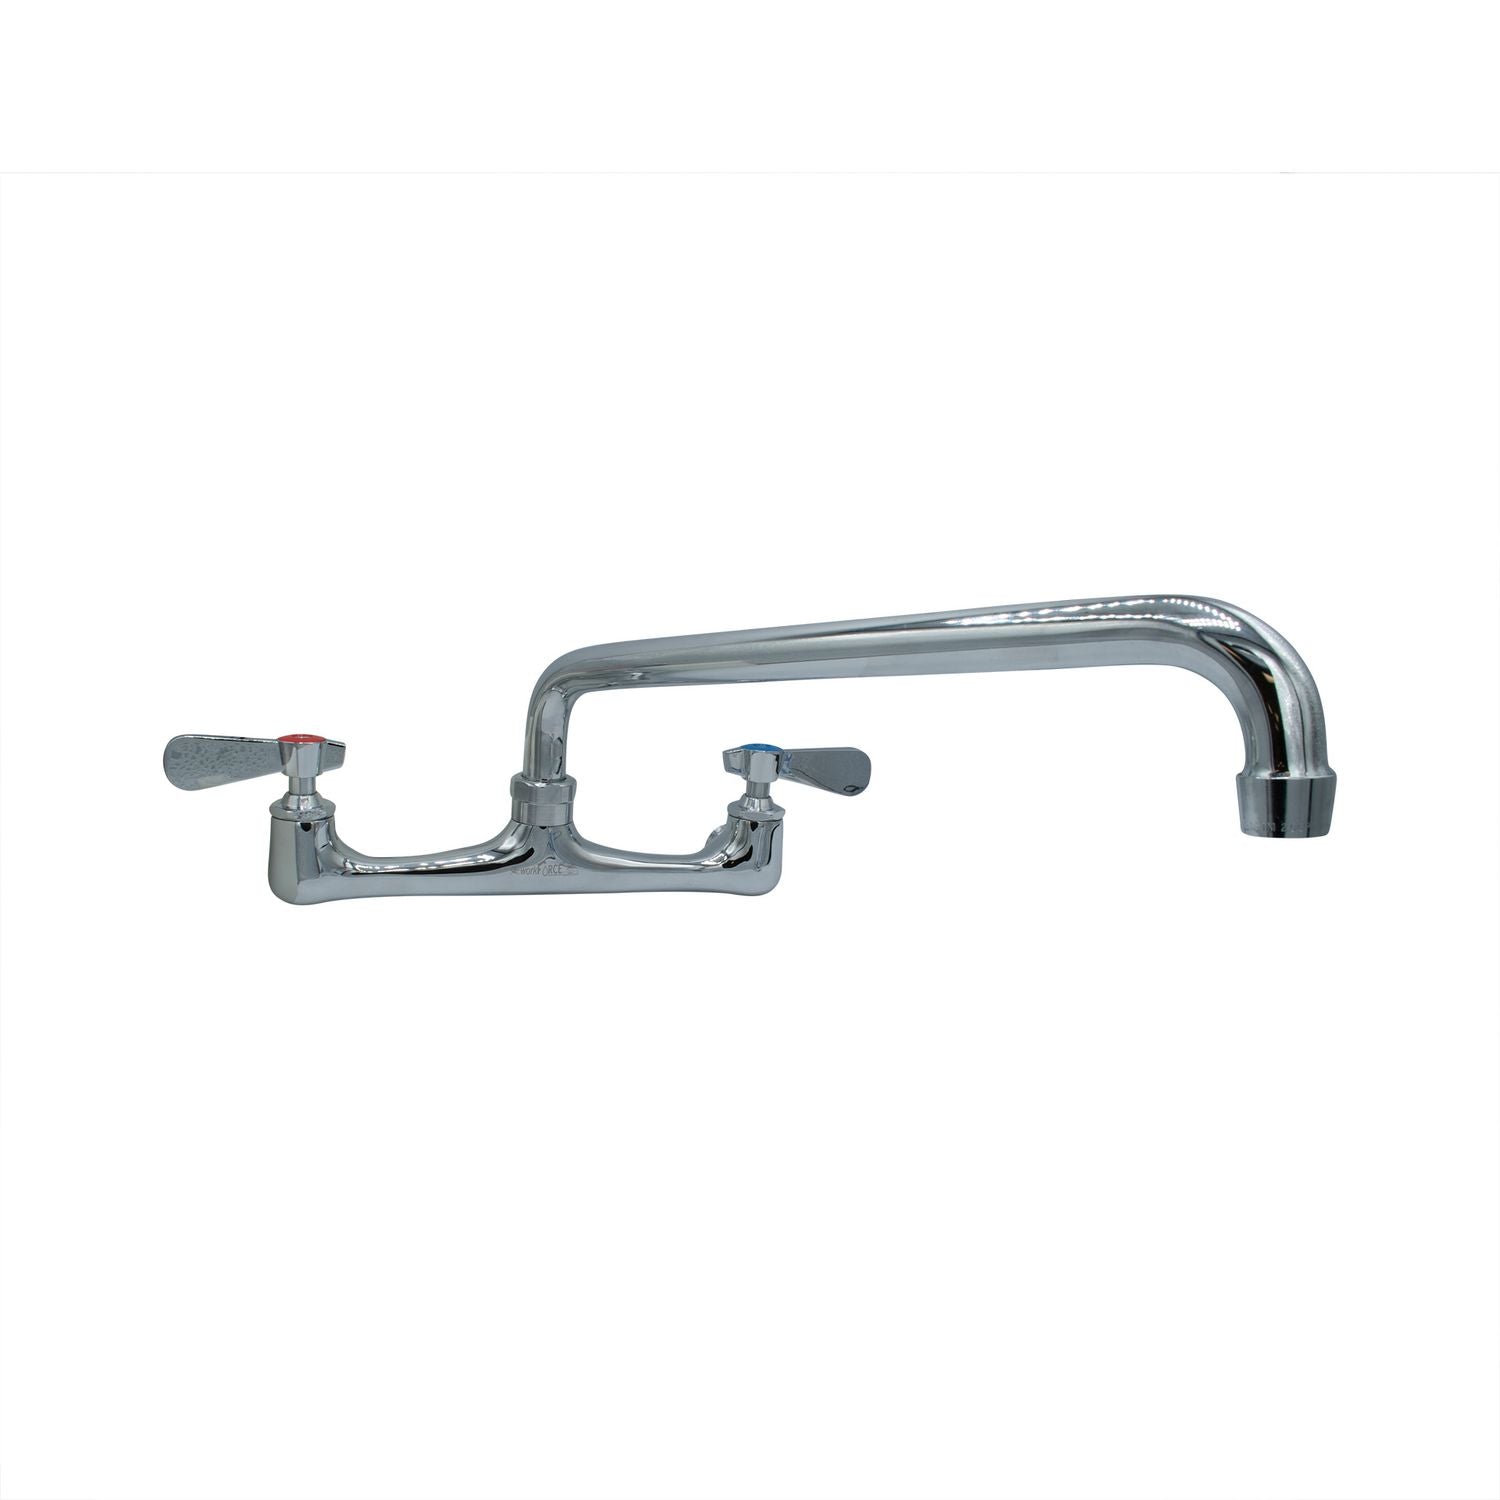 workforce-standard-duty-faucet-462-height-12-reach-chrome-plated-brass-ships-in-4-6-business-days_bkebkf8w12m - 3